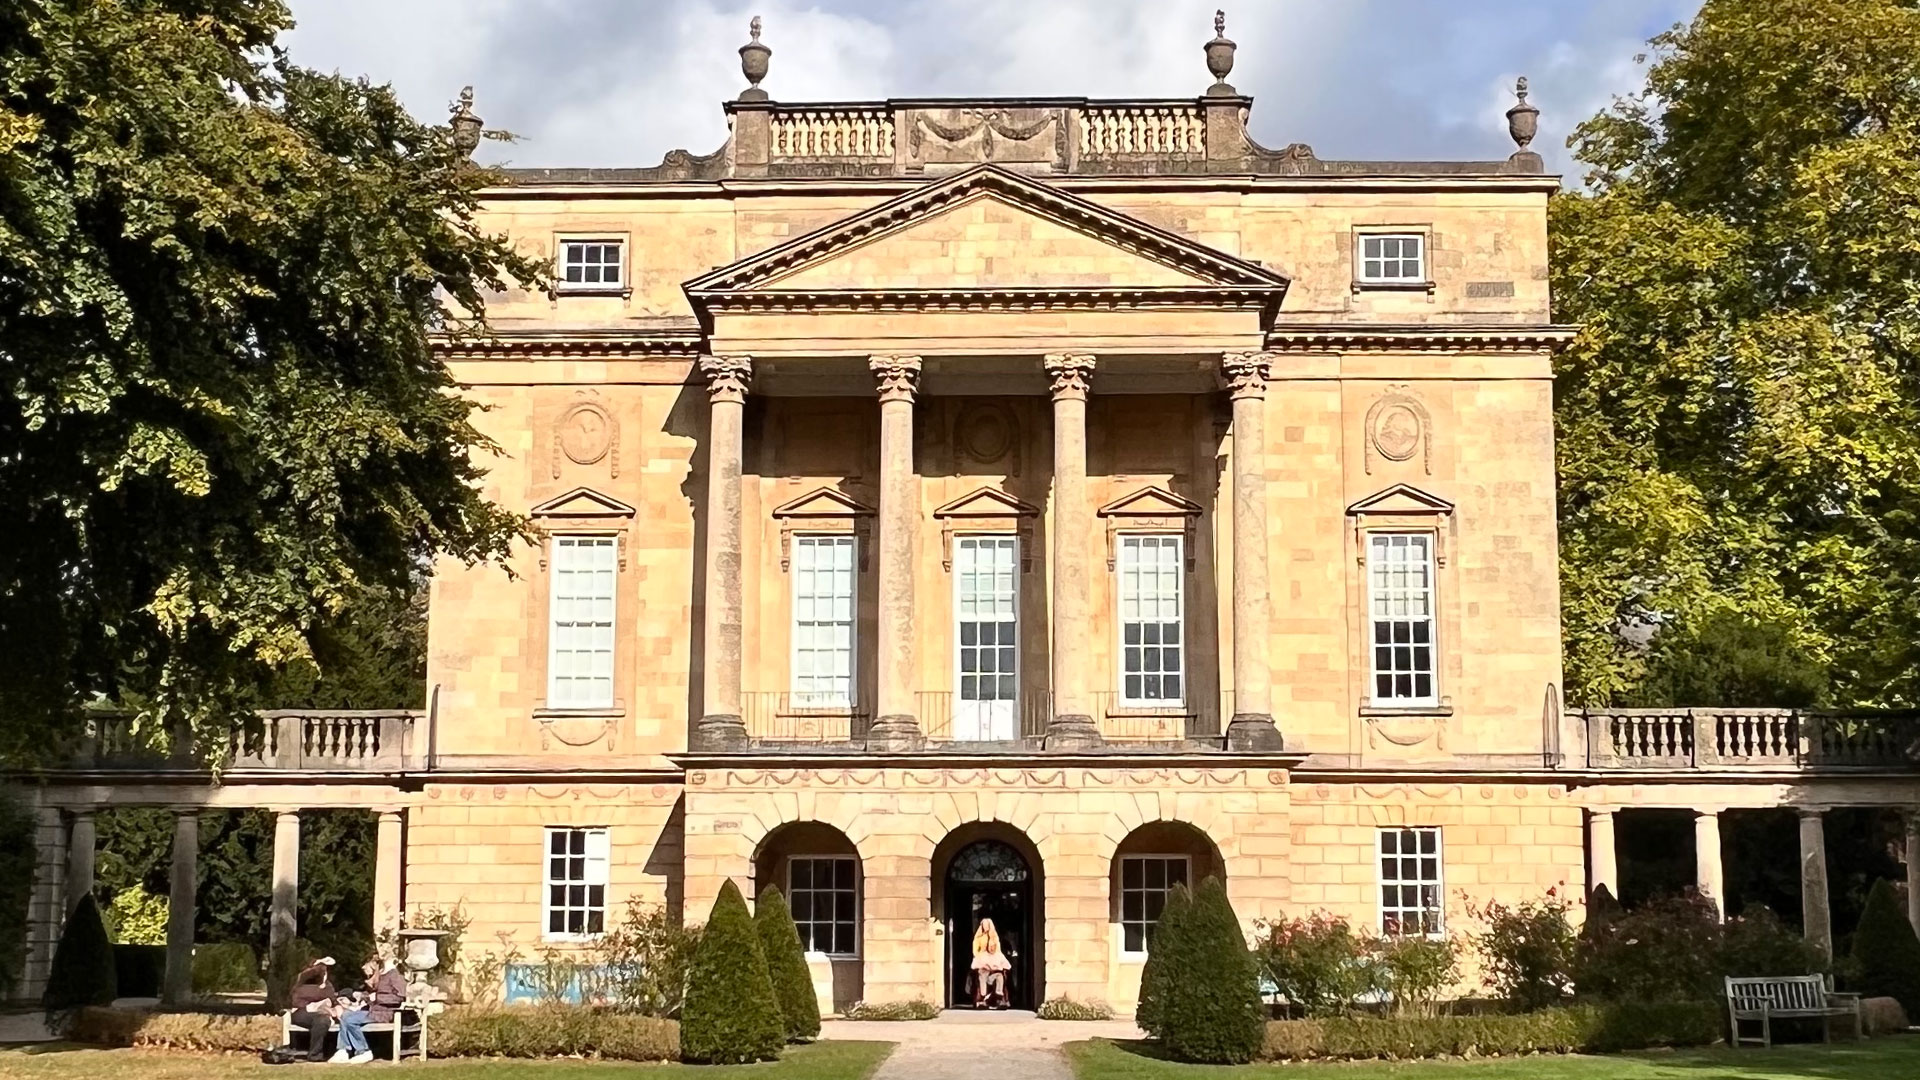 View of the facade of the Holburne Museum of Art